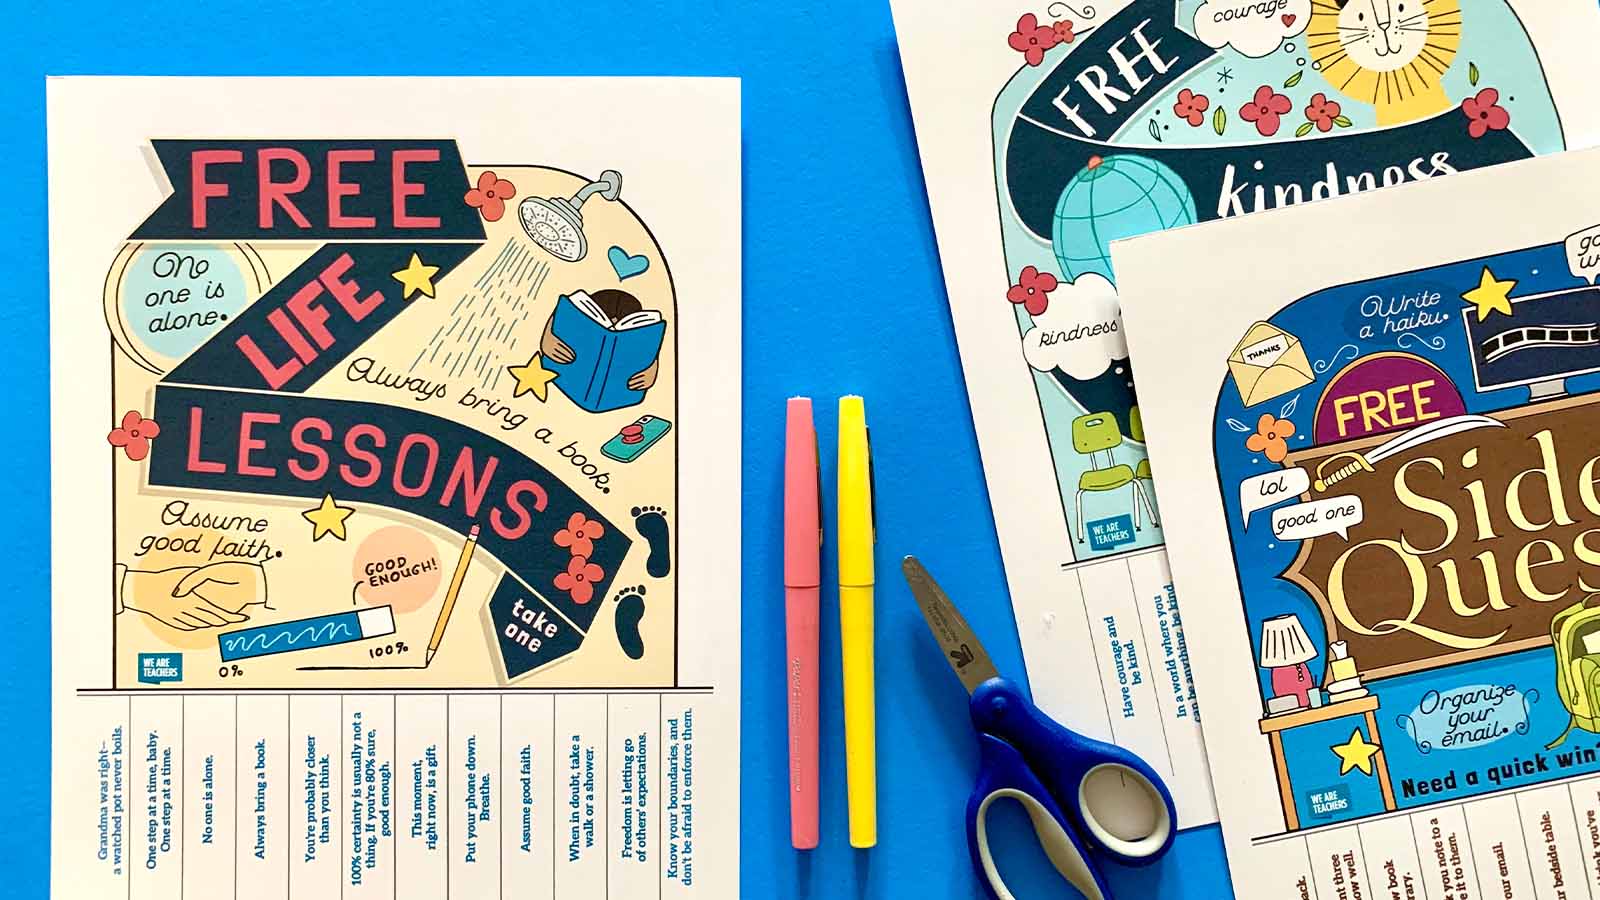 Free Take-One Posters Guaranteed to Bring Smiles